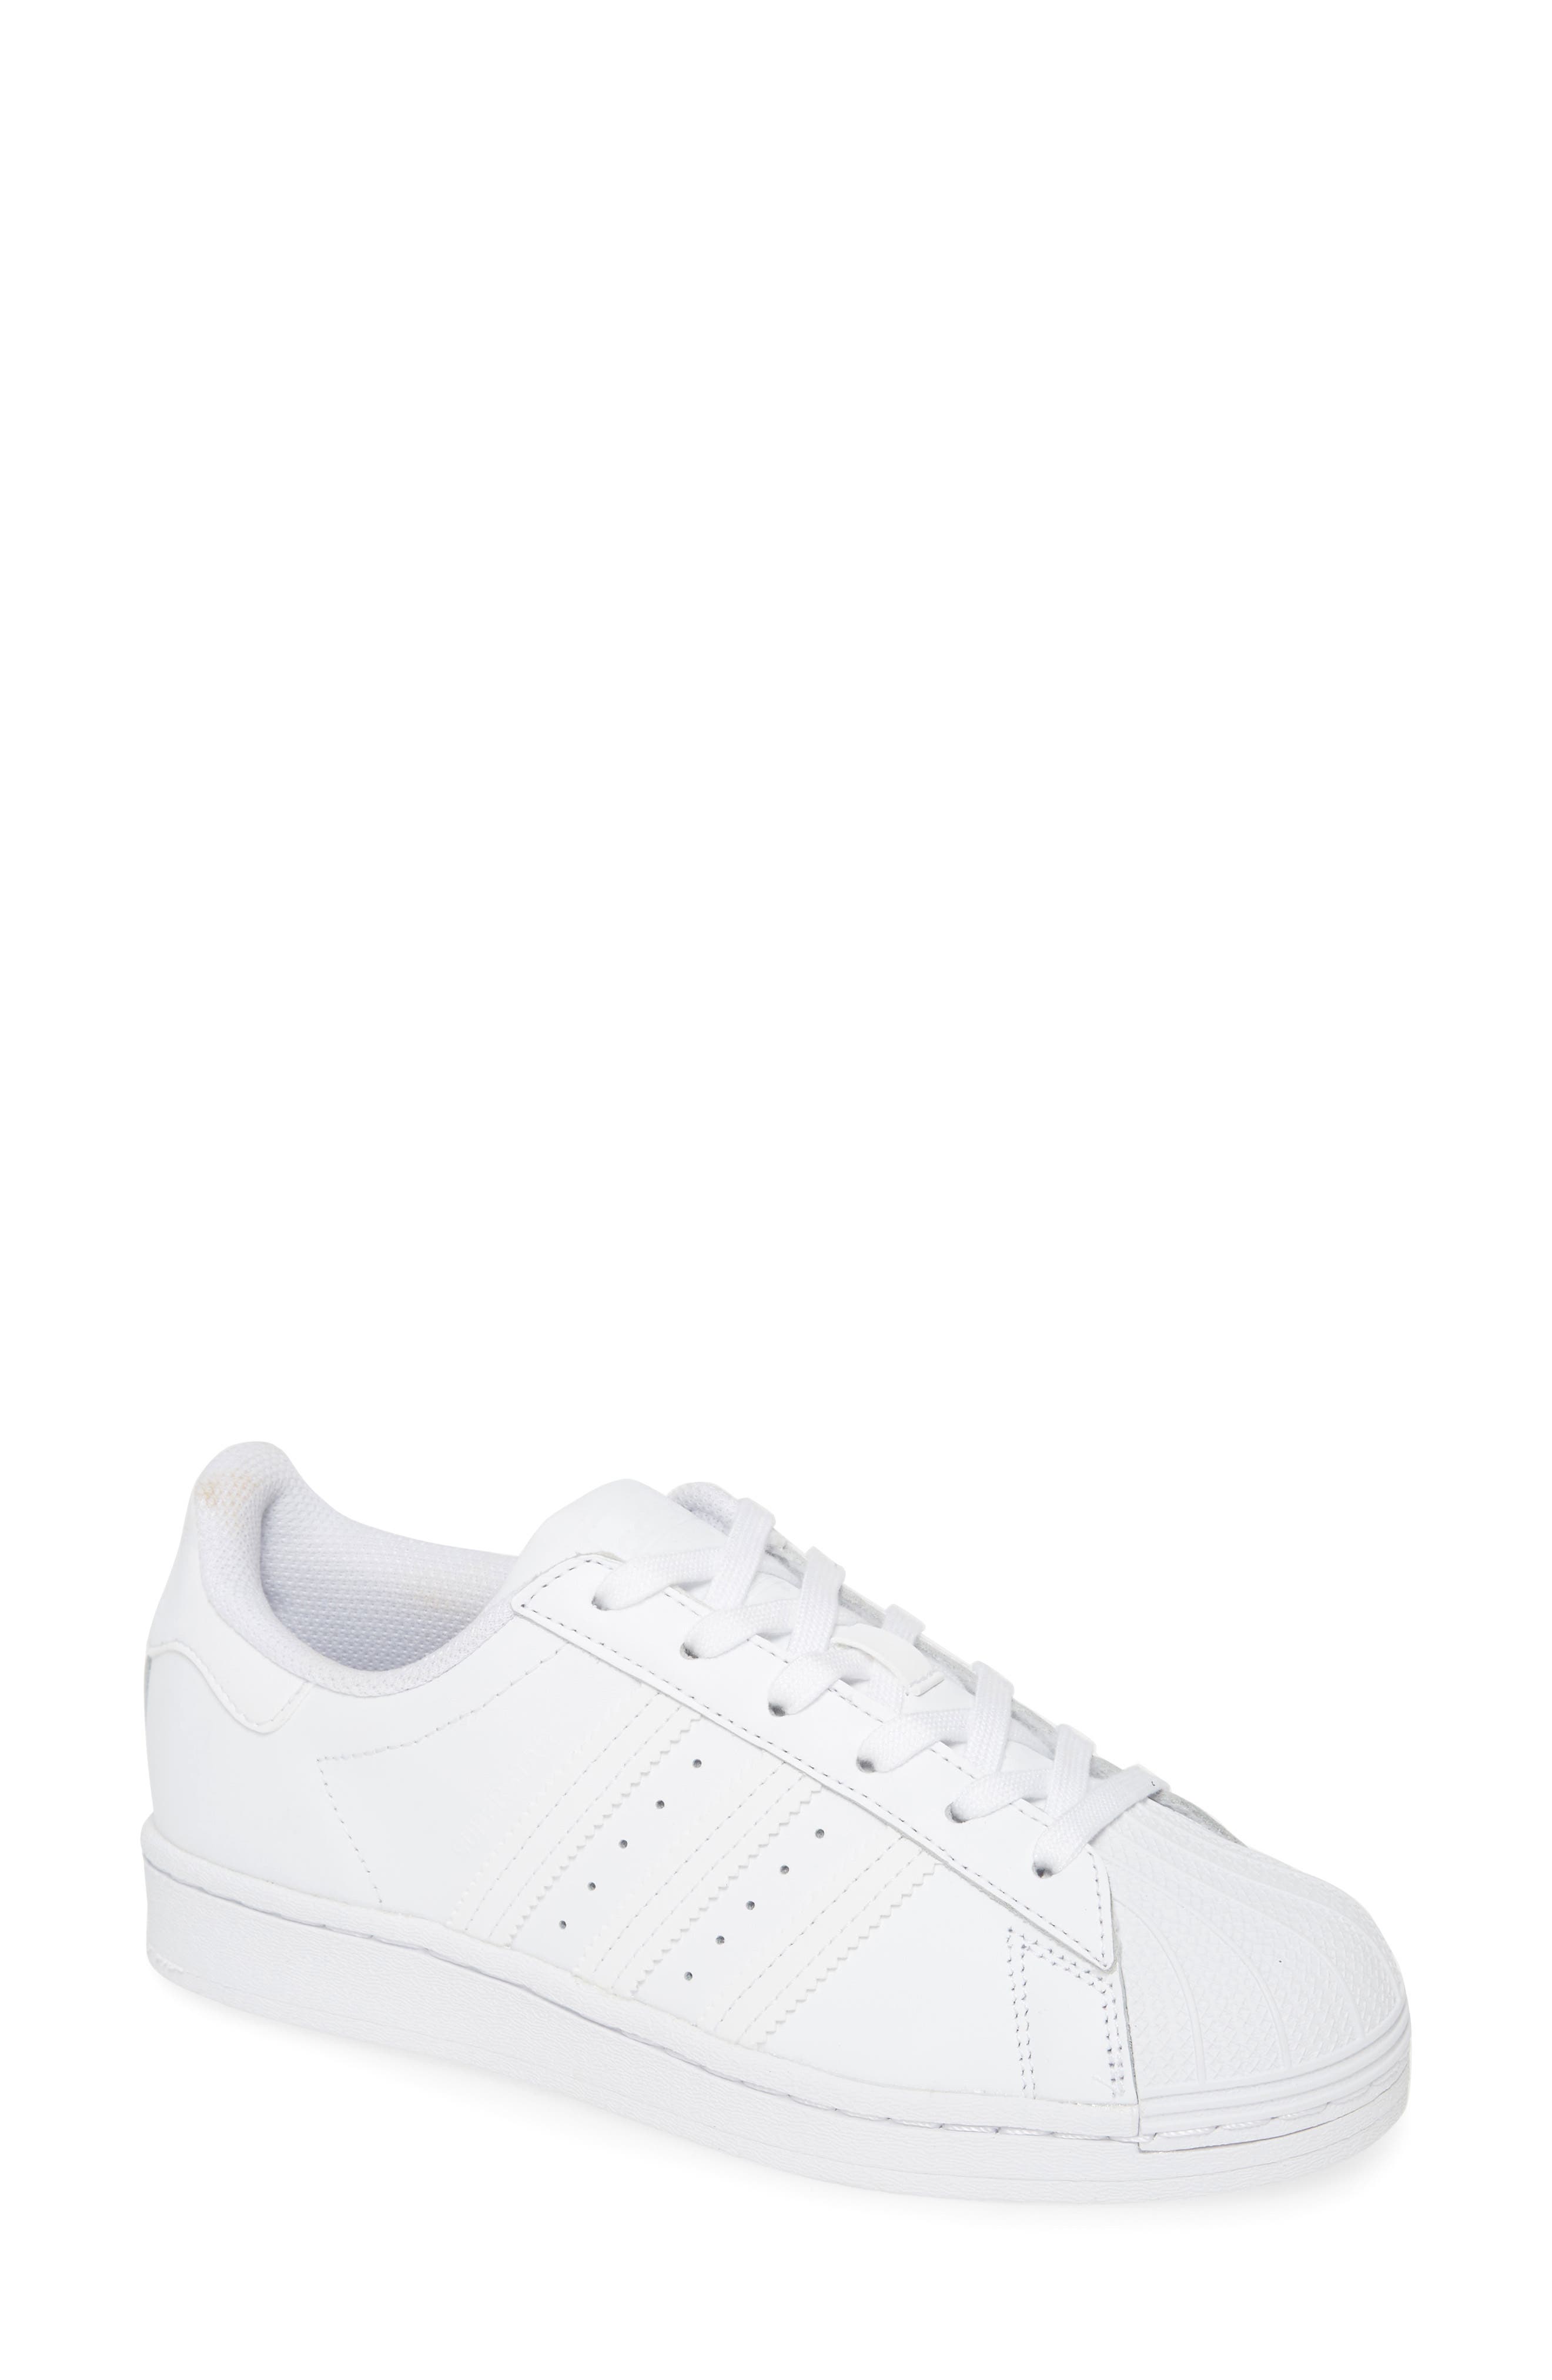 new adidas shoes white